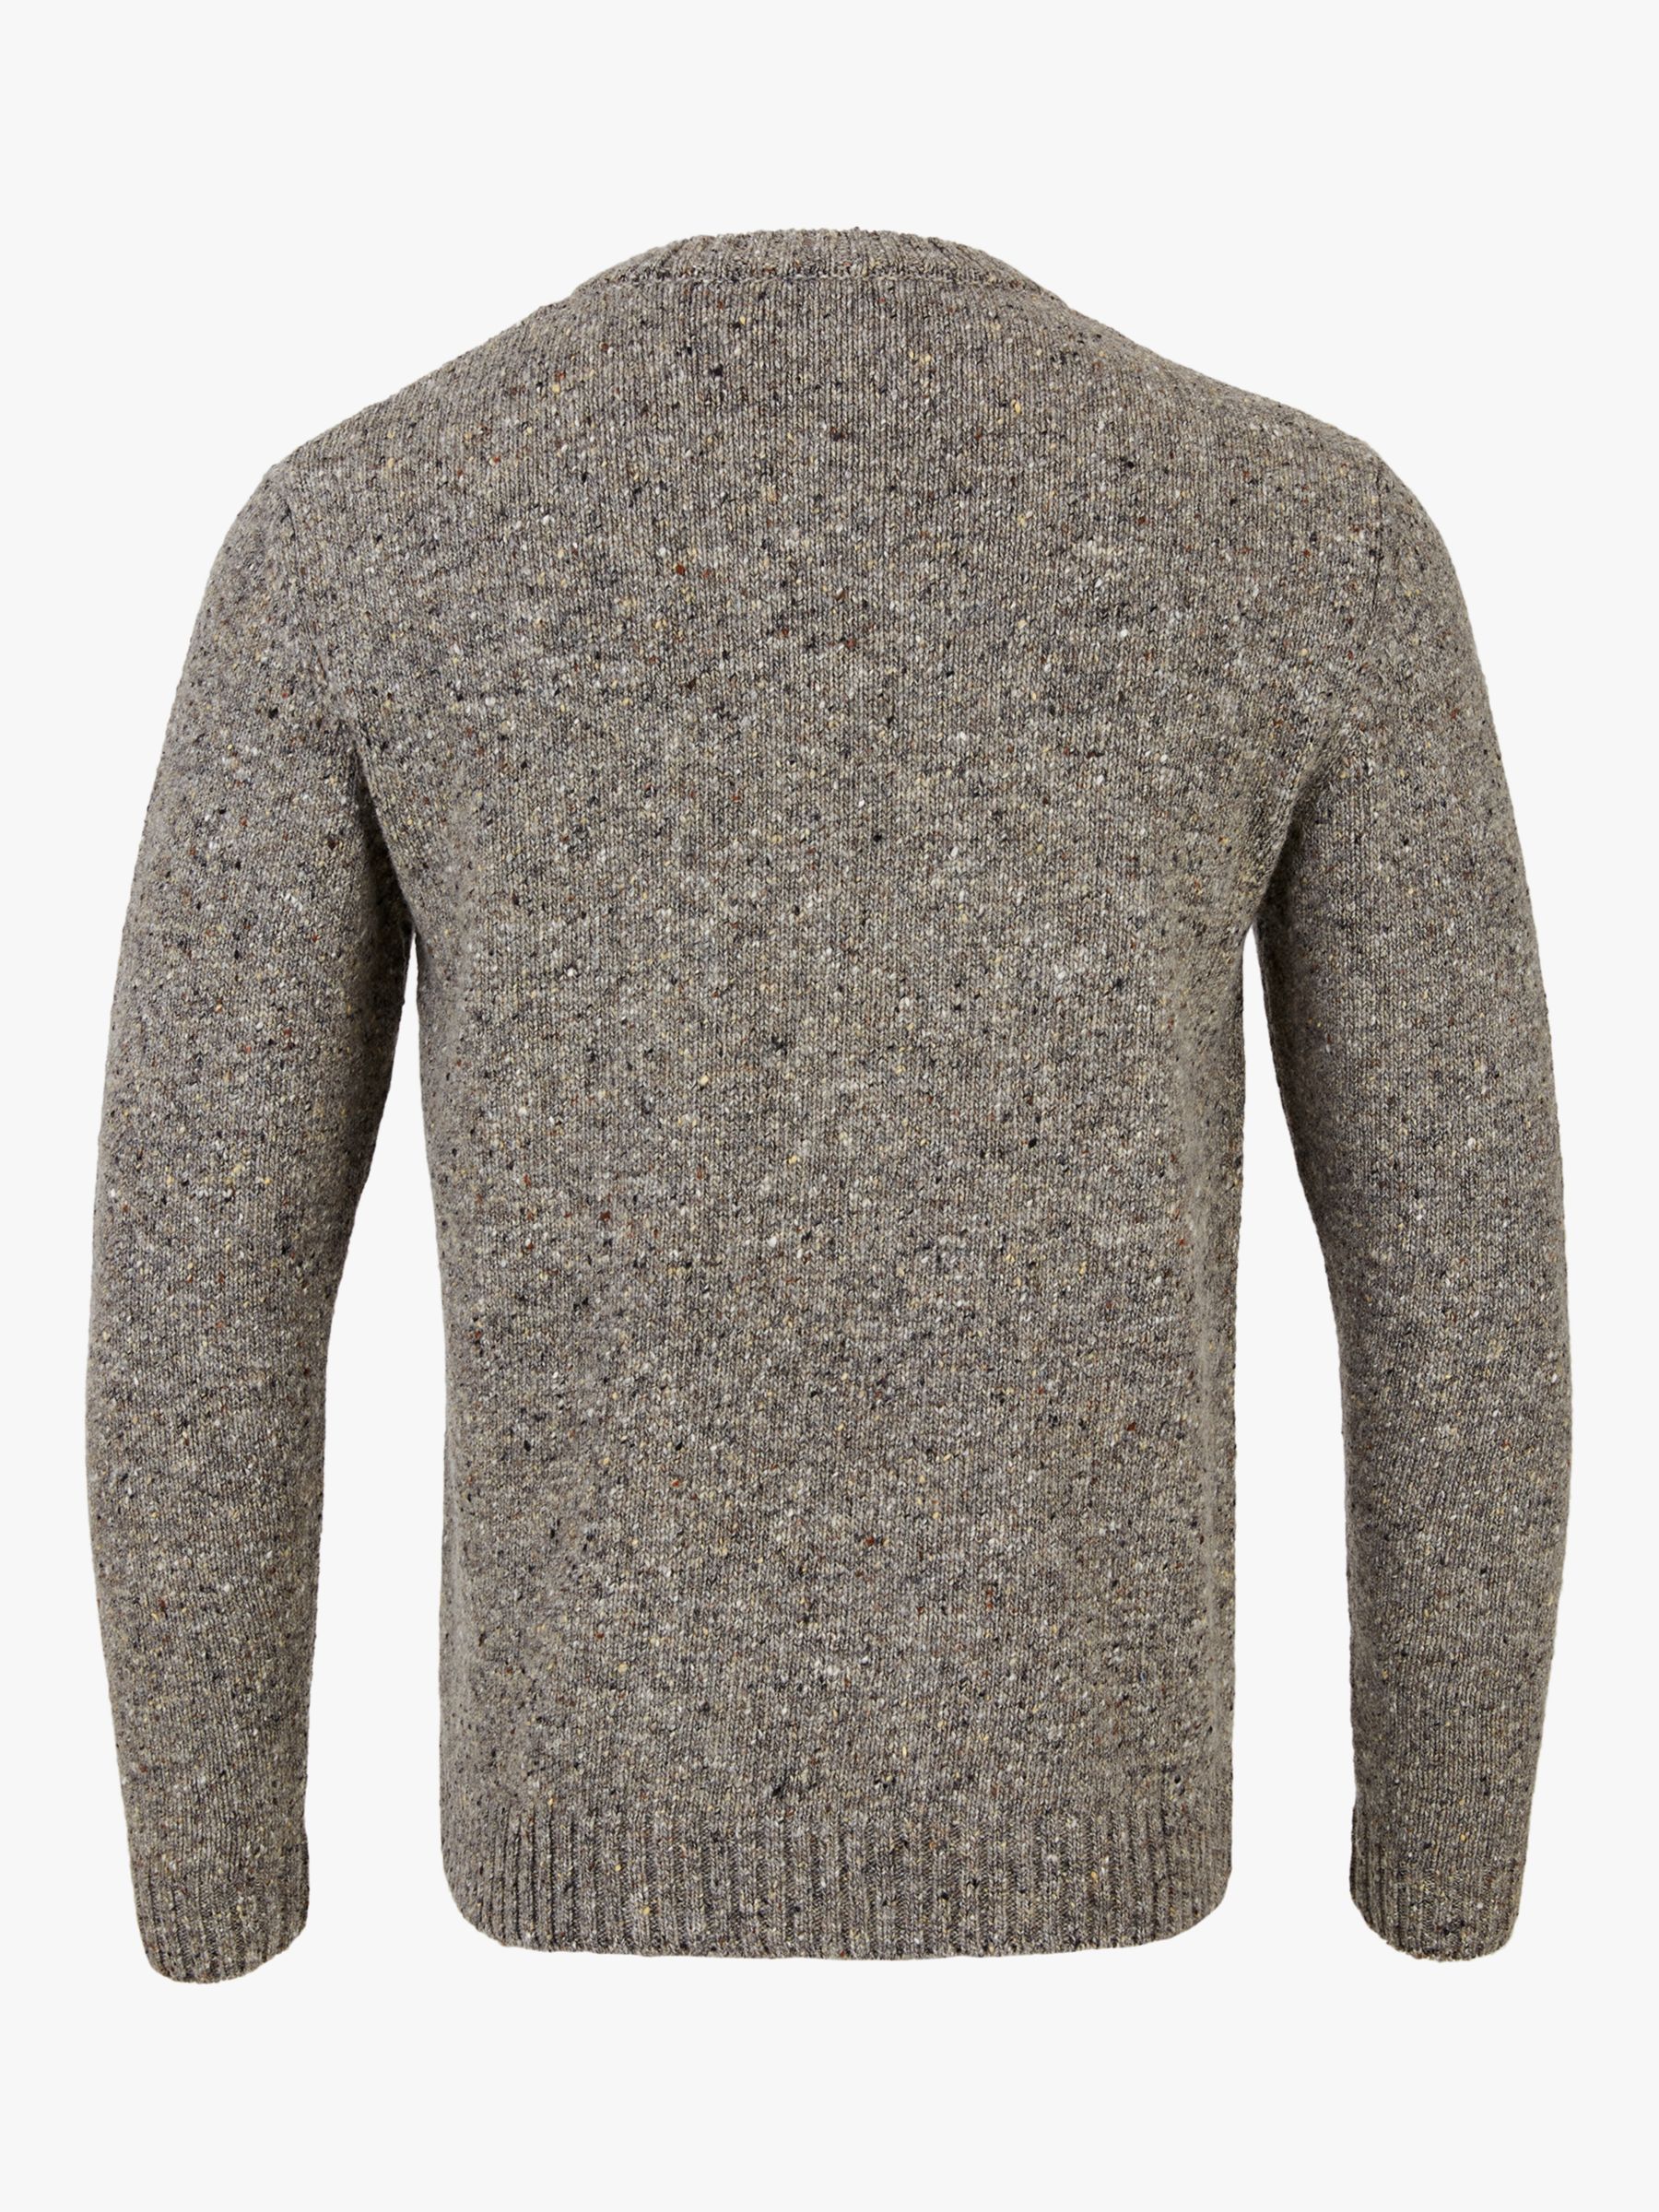 Celtic & Co. Donegal Wool Crew Neck Jumper, Grey Pebble at John Lewis ...